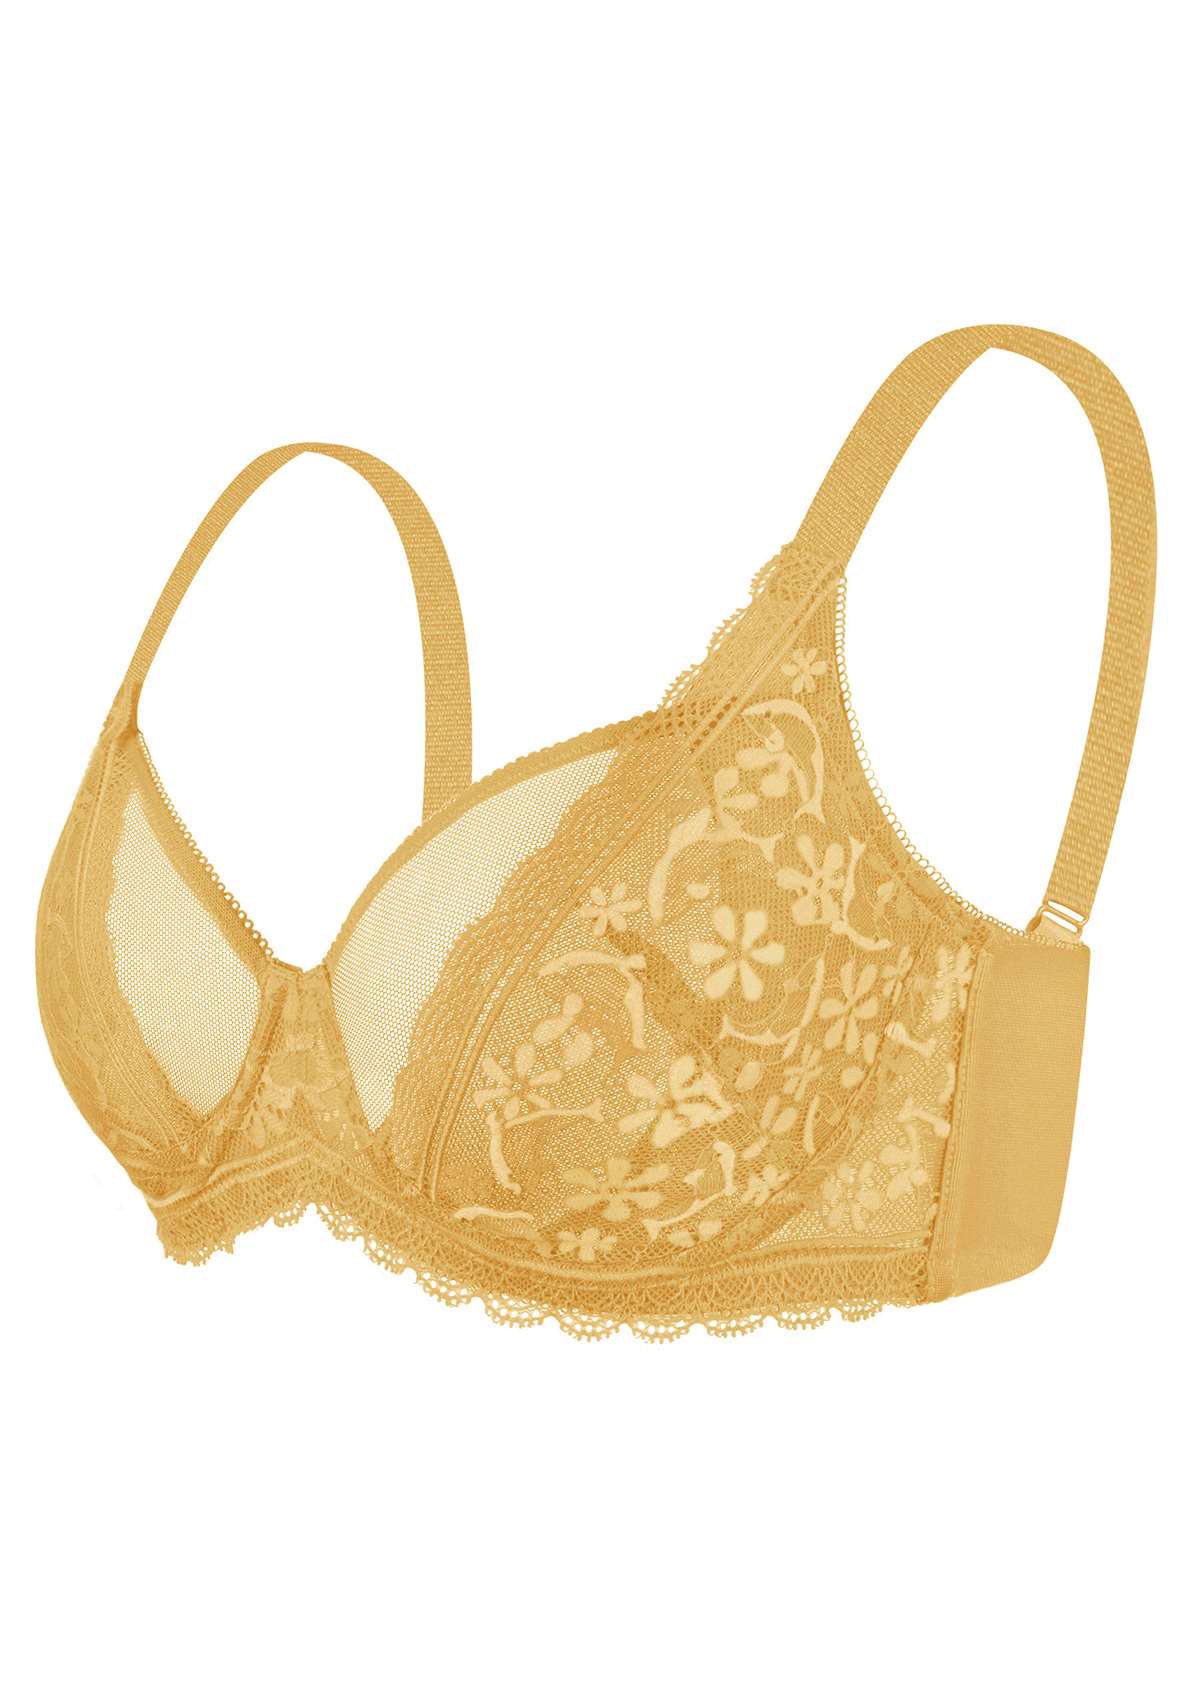 HSIA Anemone Lace Unlined Bra: Supportive, Lightweight Bra - Champagne / 36 / C